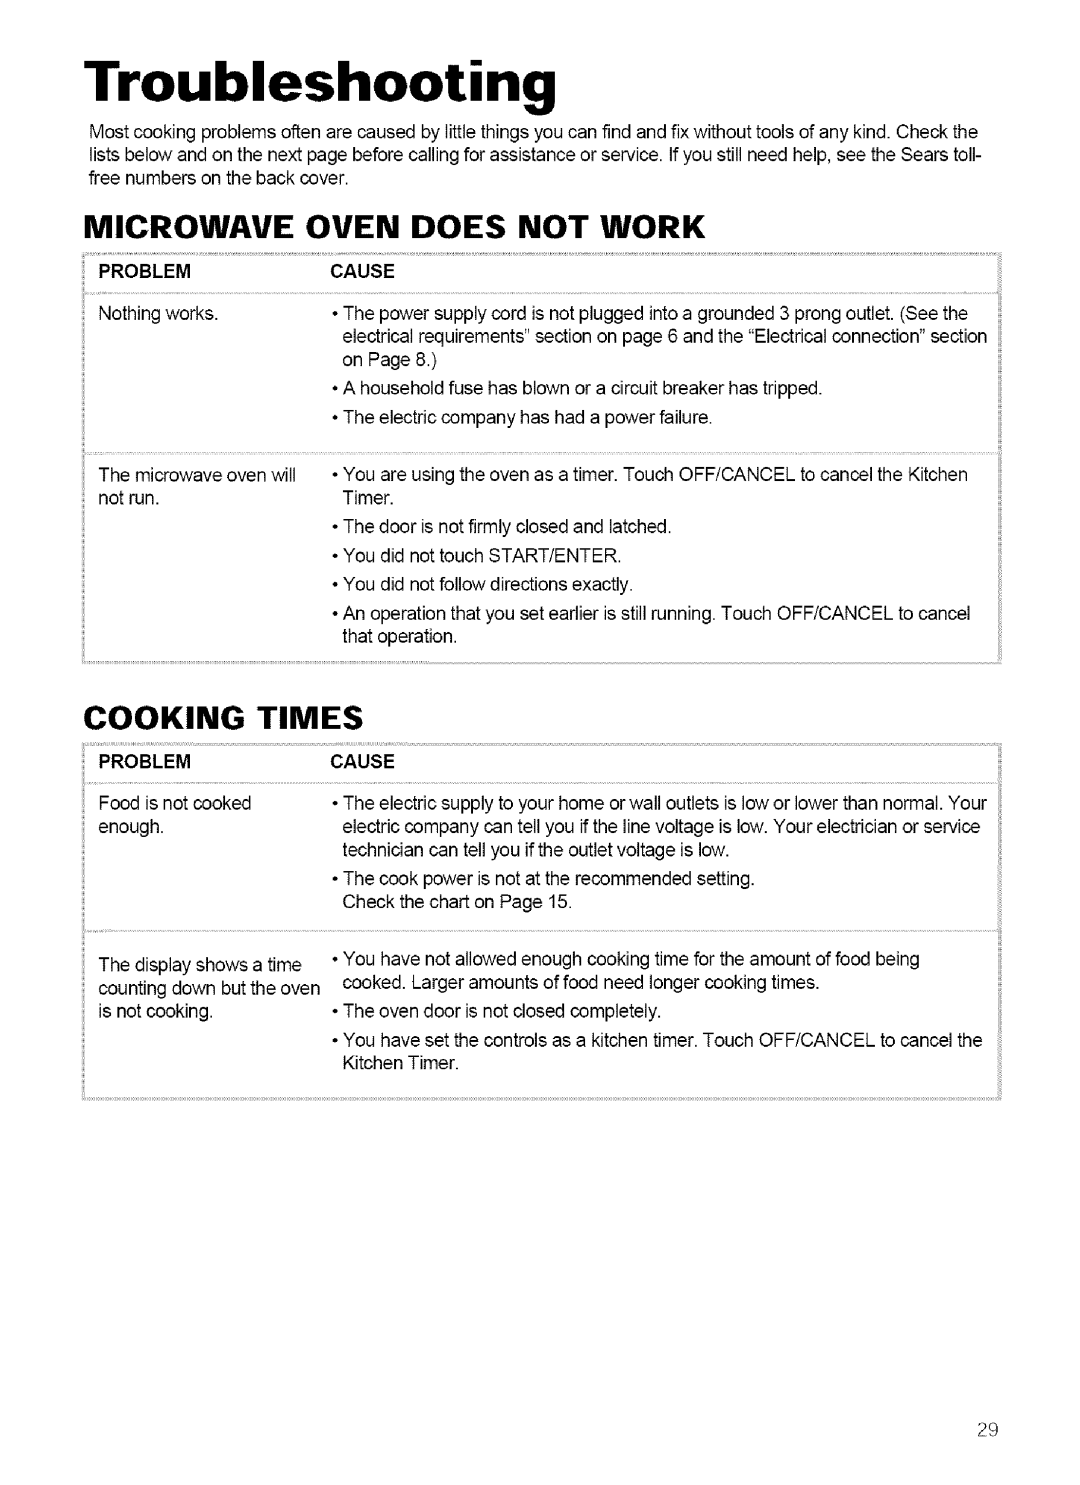 Kenmore 721.62759, 721.62752 manual Troubleshooting, Microwave, Oven Does Not Work, Cooking Times 